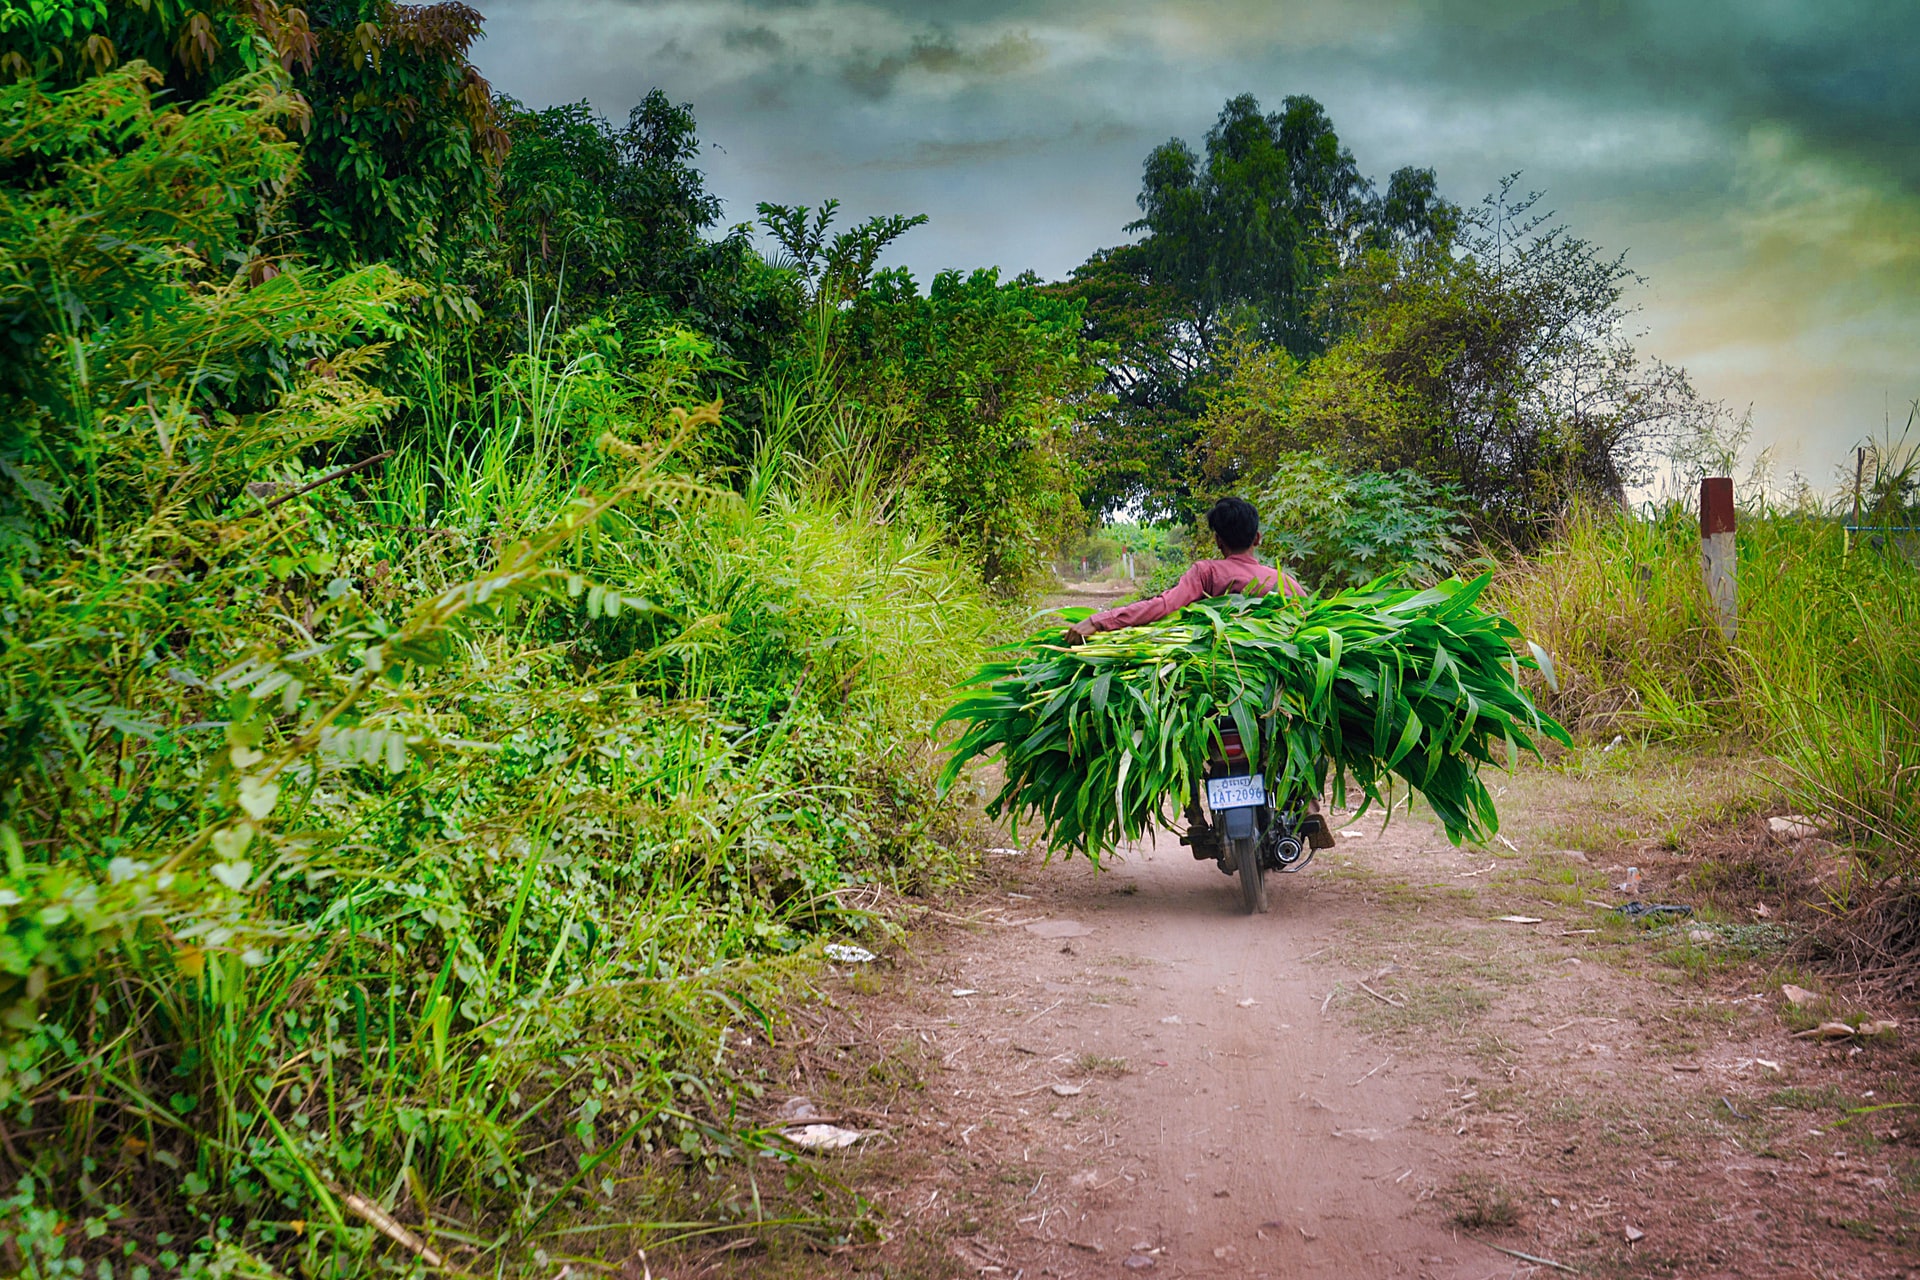 man in red shirt riding motorcycle loaded with green leaves countryside road in Cambodia, during daytime